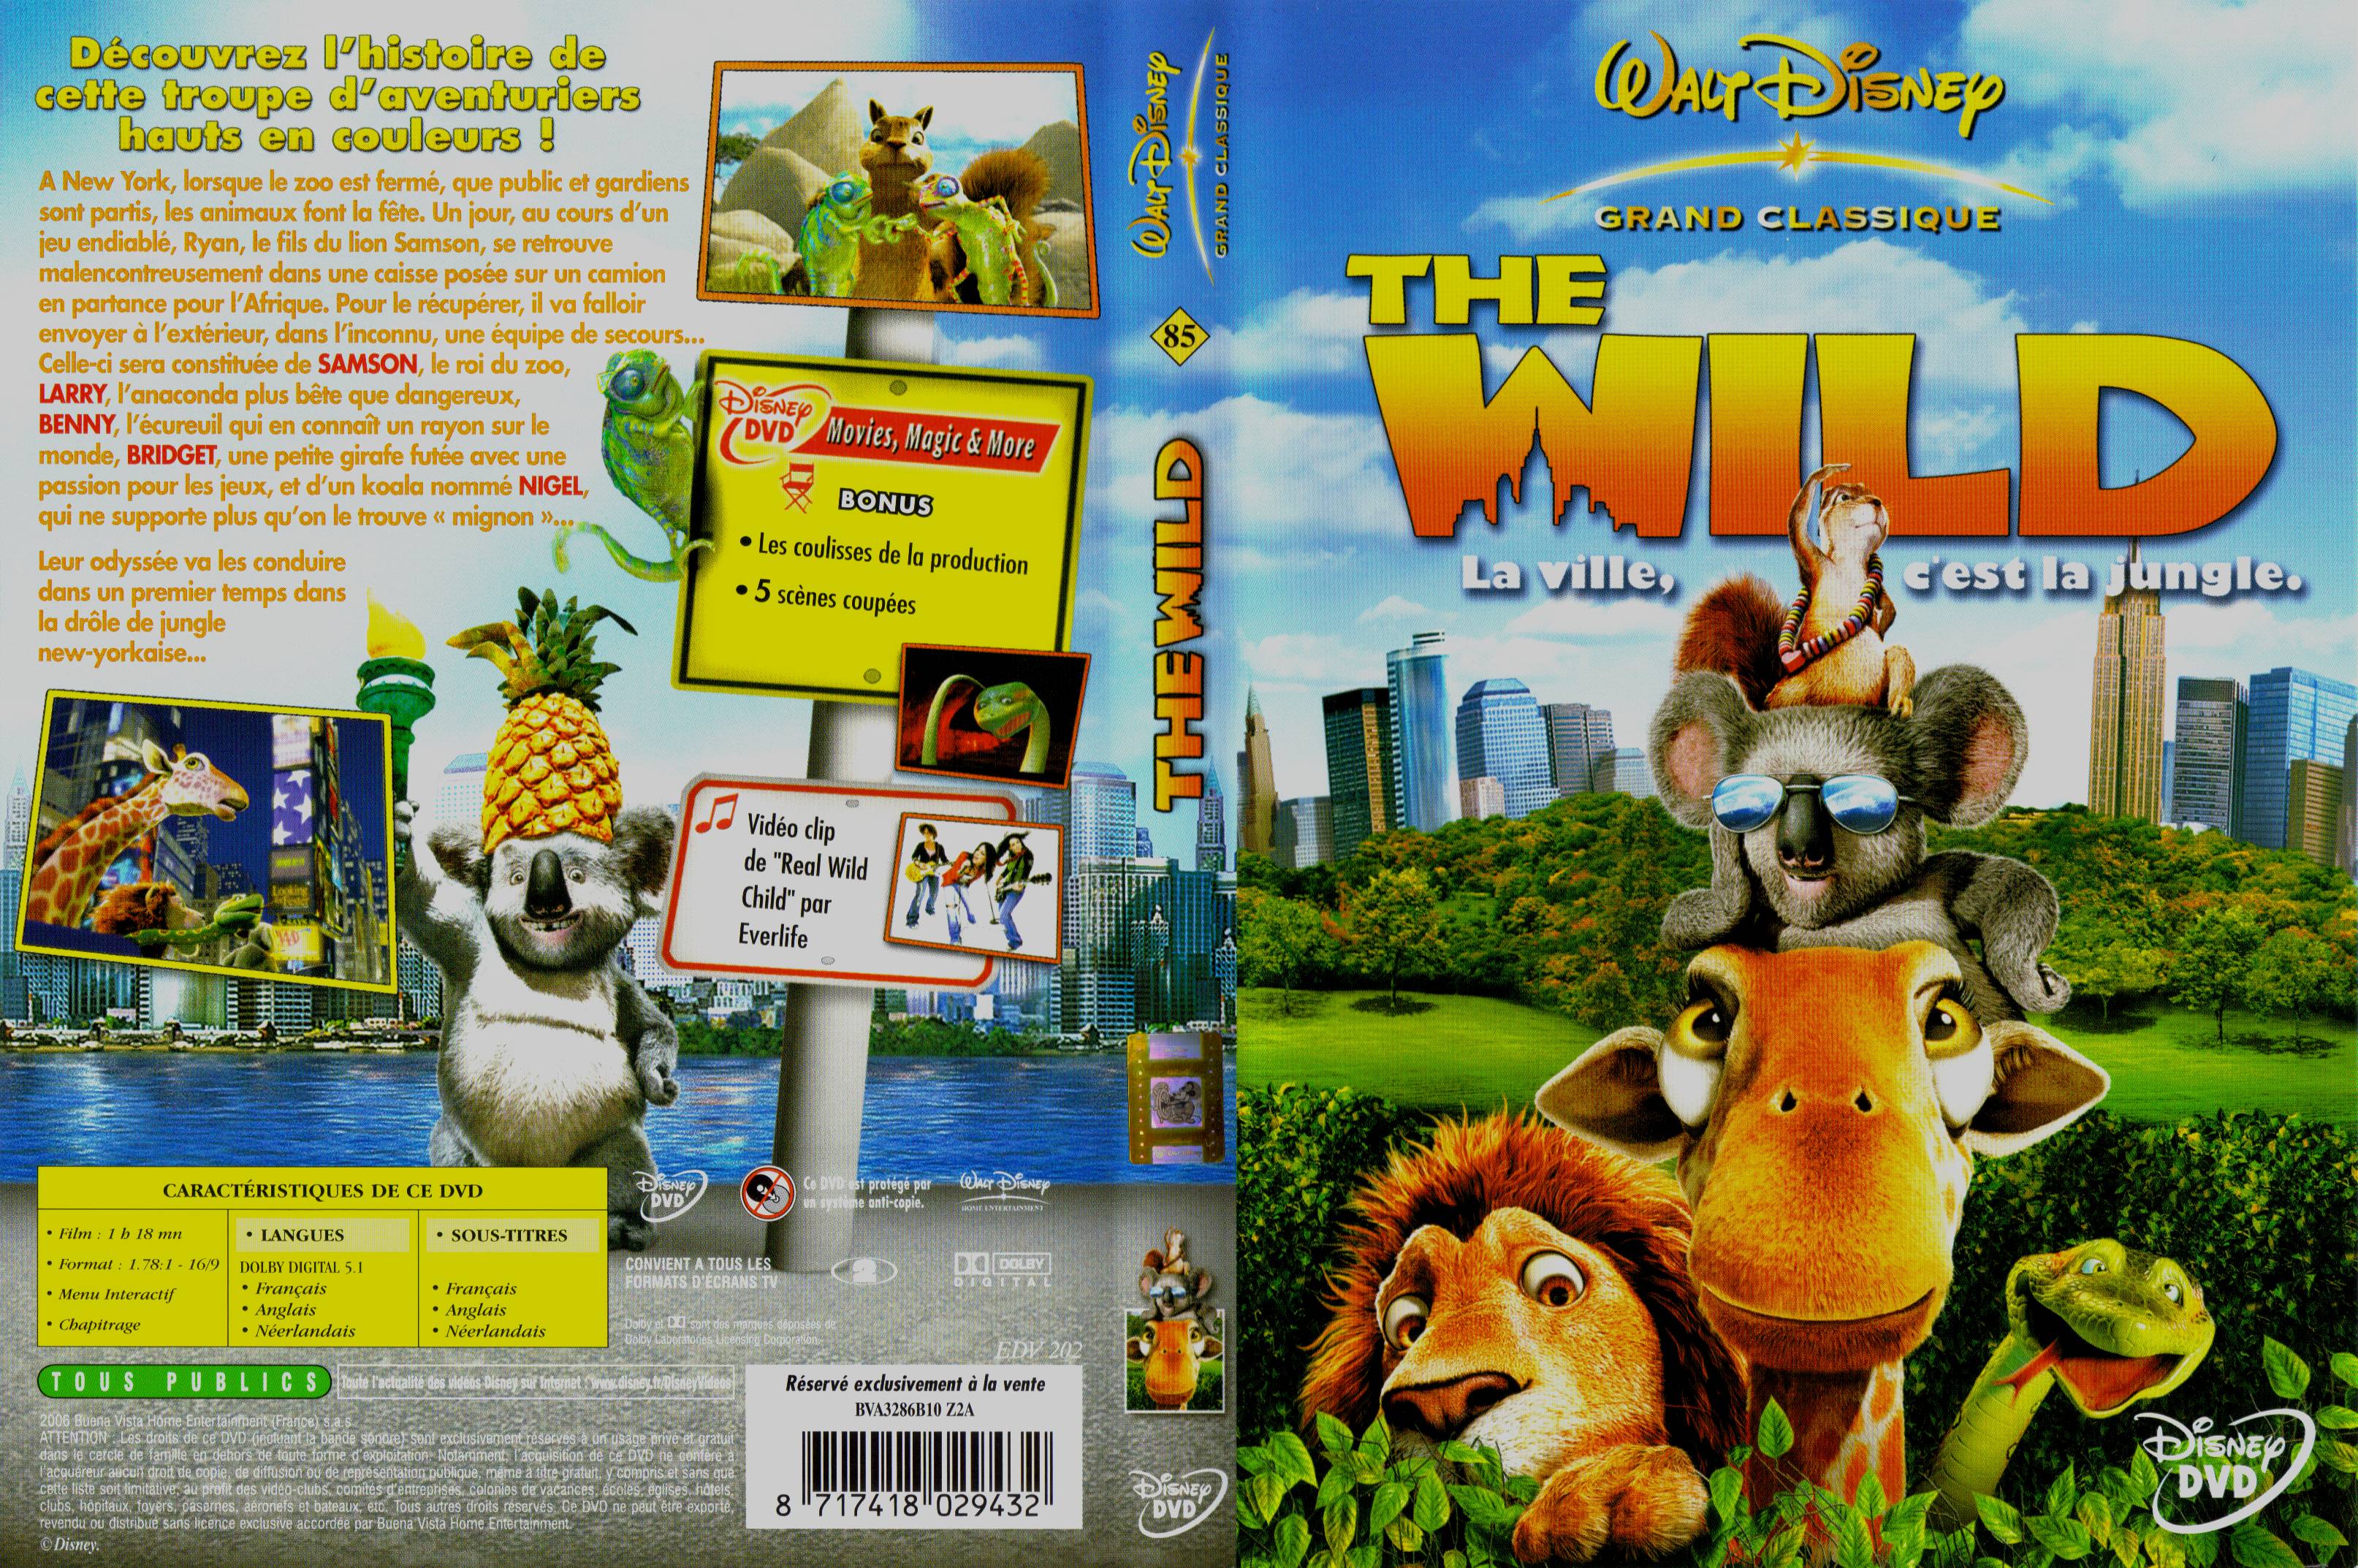 Jaquette DVD The wild